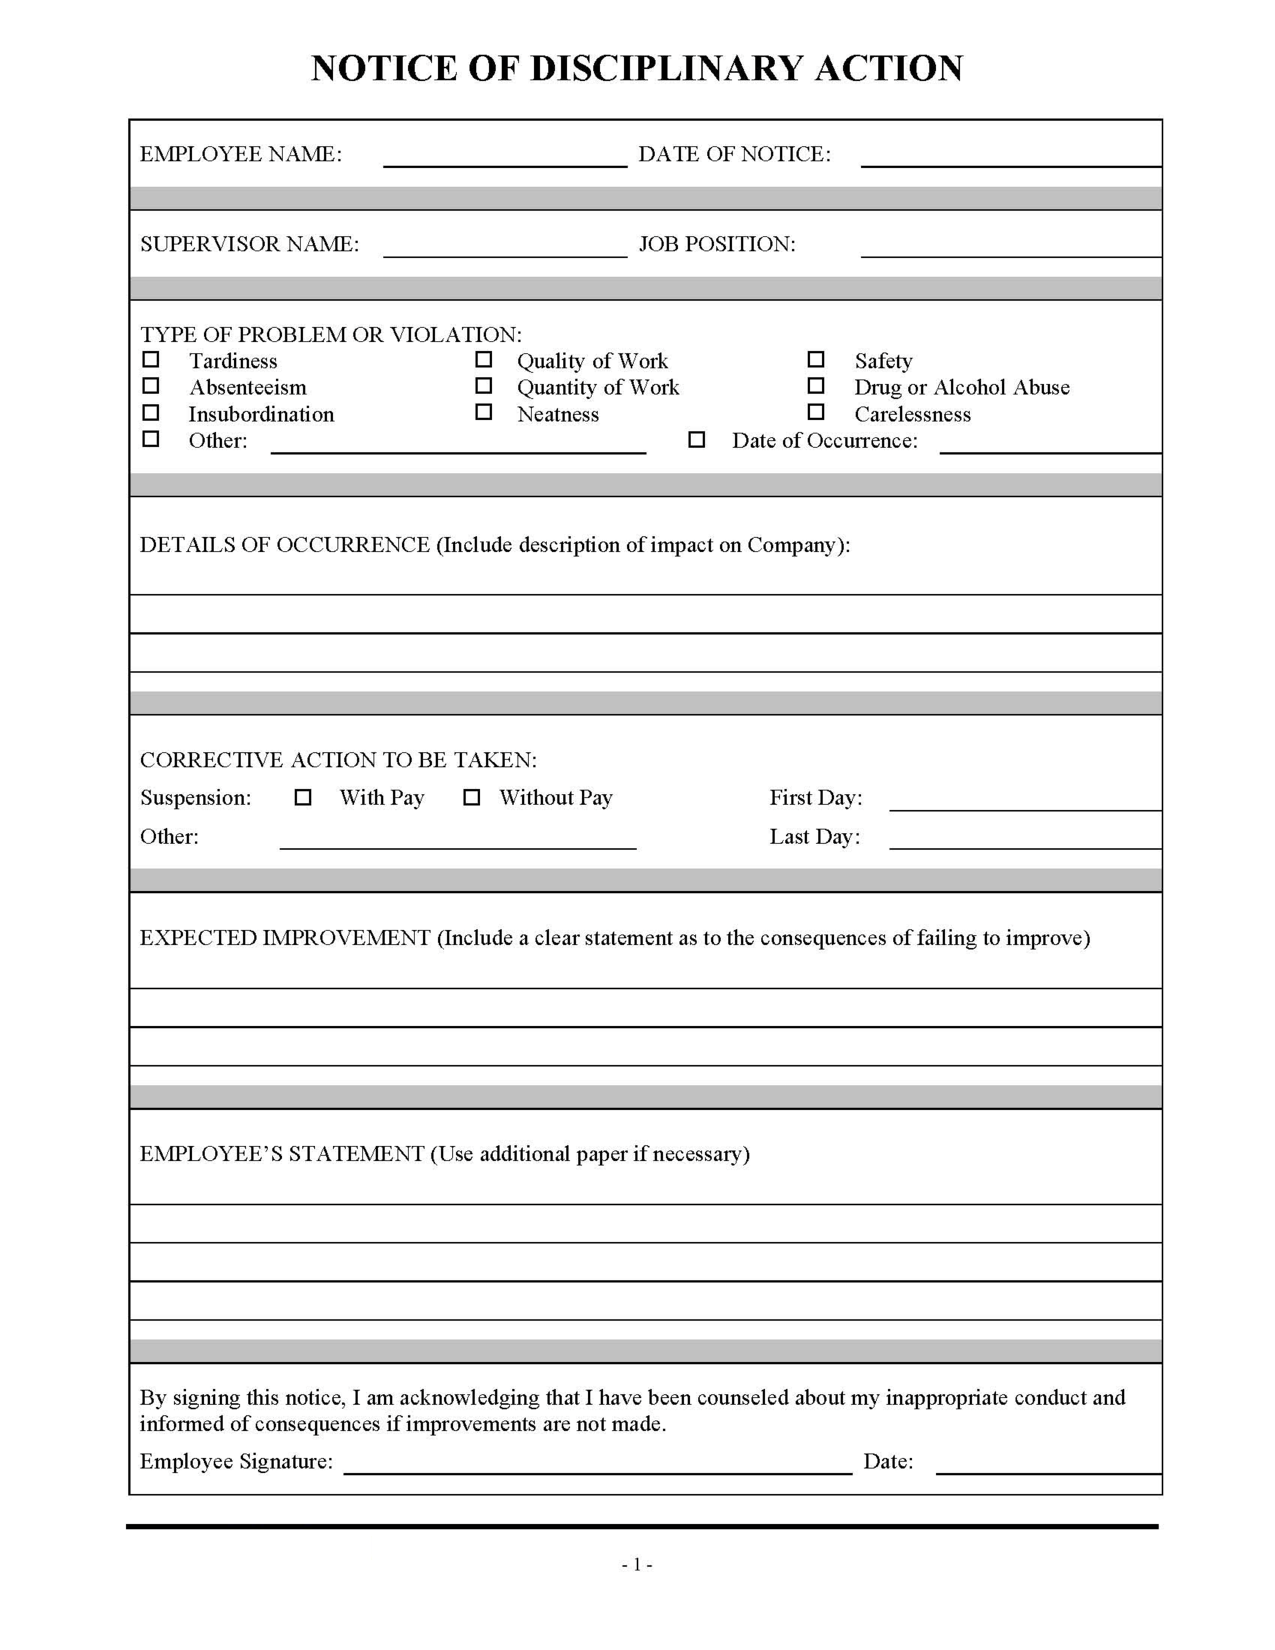 employee disciplinary form template   Ecza.solinf.co